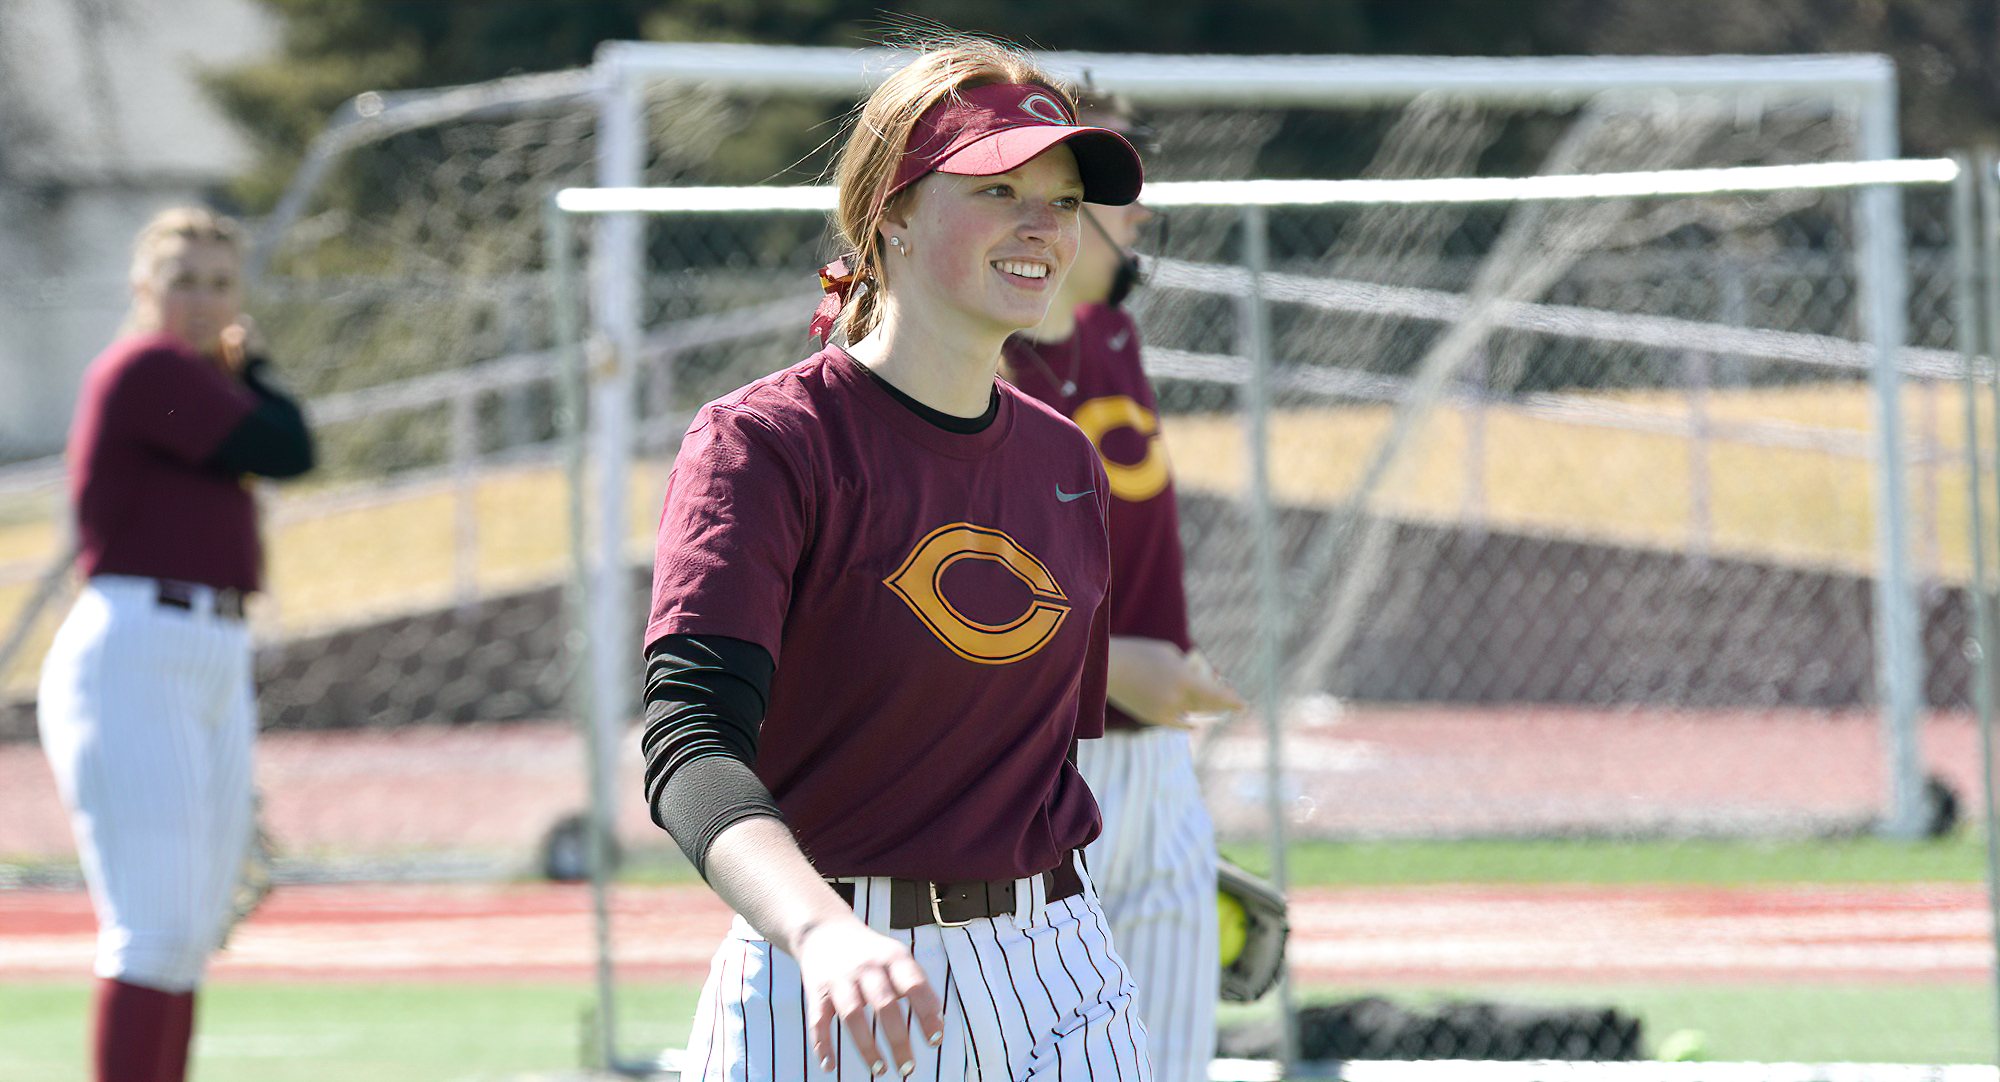 Senior Drew Syverson had hits in both games of the Cobbers' split at St. Scholastica. She was 3-for-7 on the day.